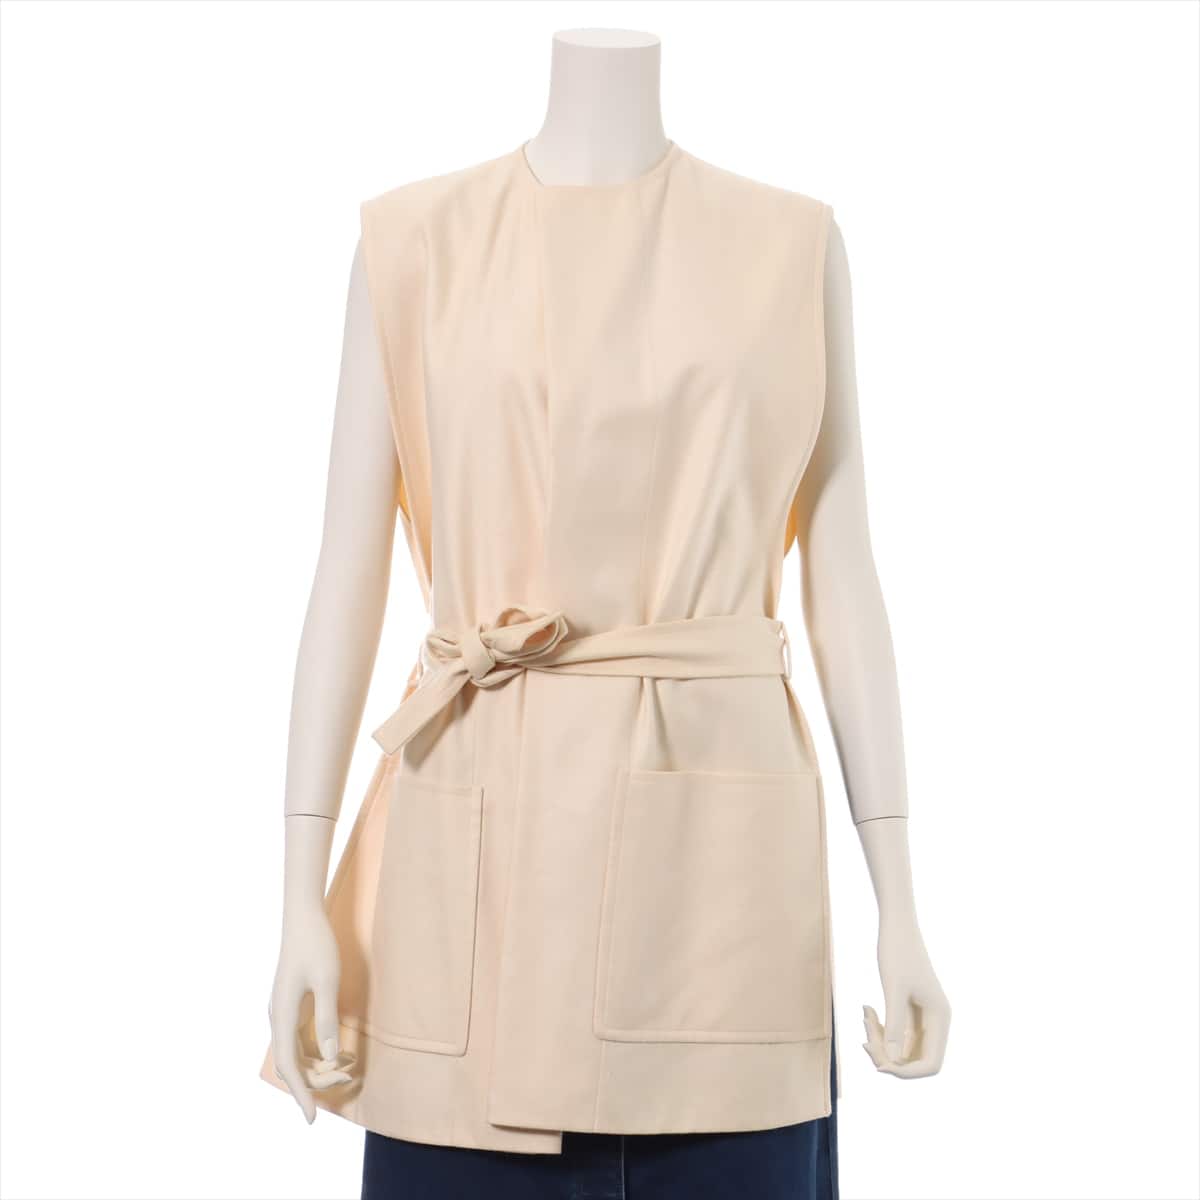 Hermès Margiela Cashmere Jacket 34 Ladies' Ivory  separate Sleeveless There are stains and stains on the belt